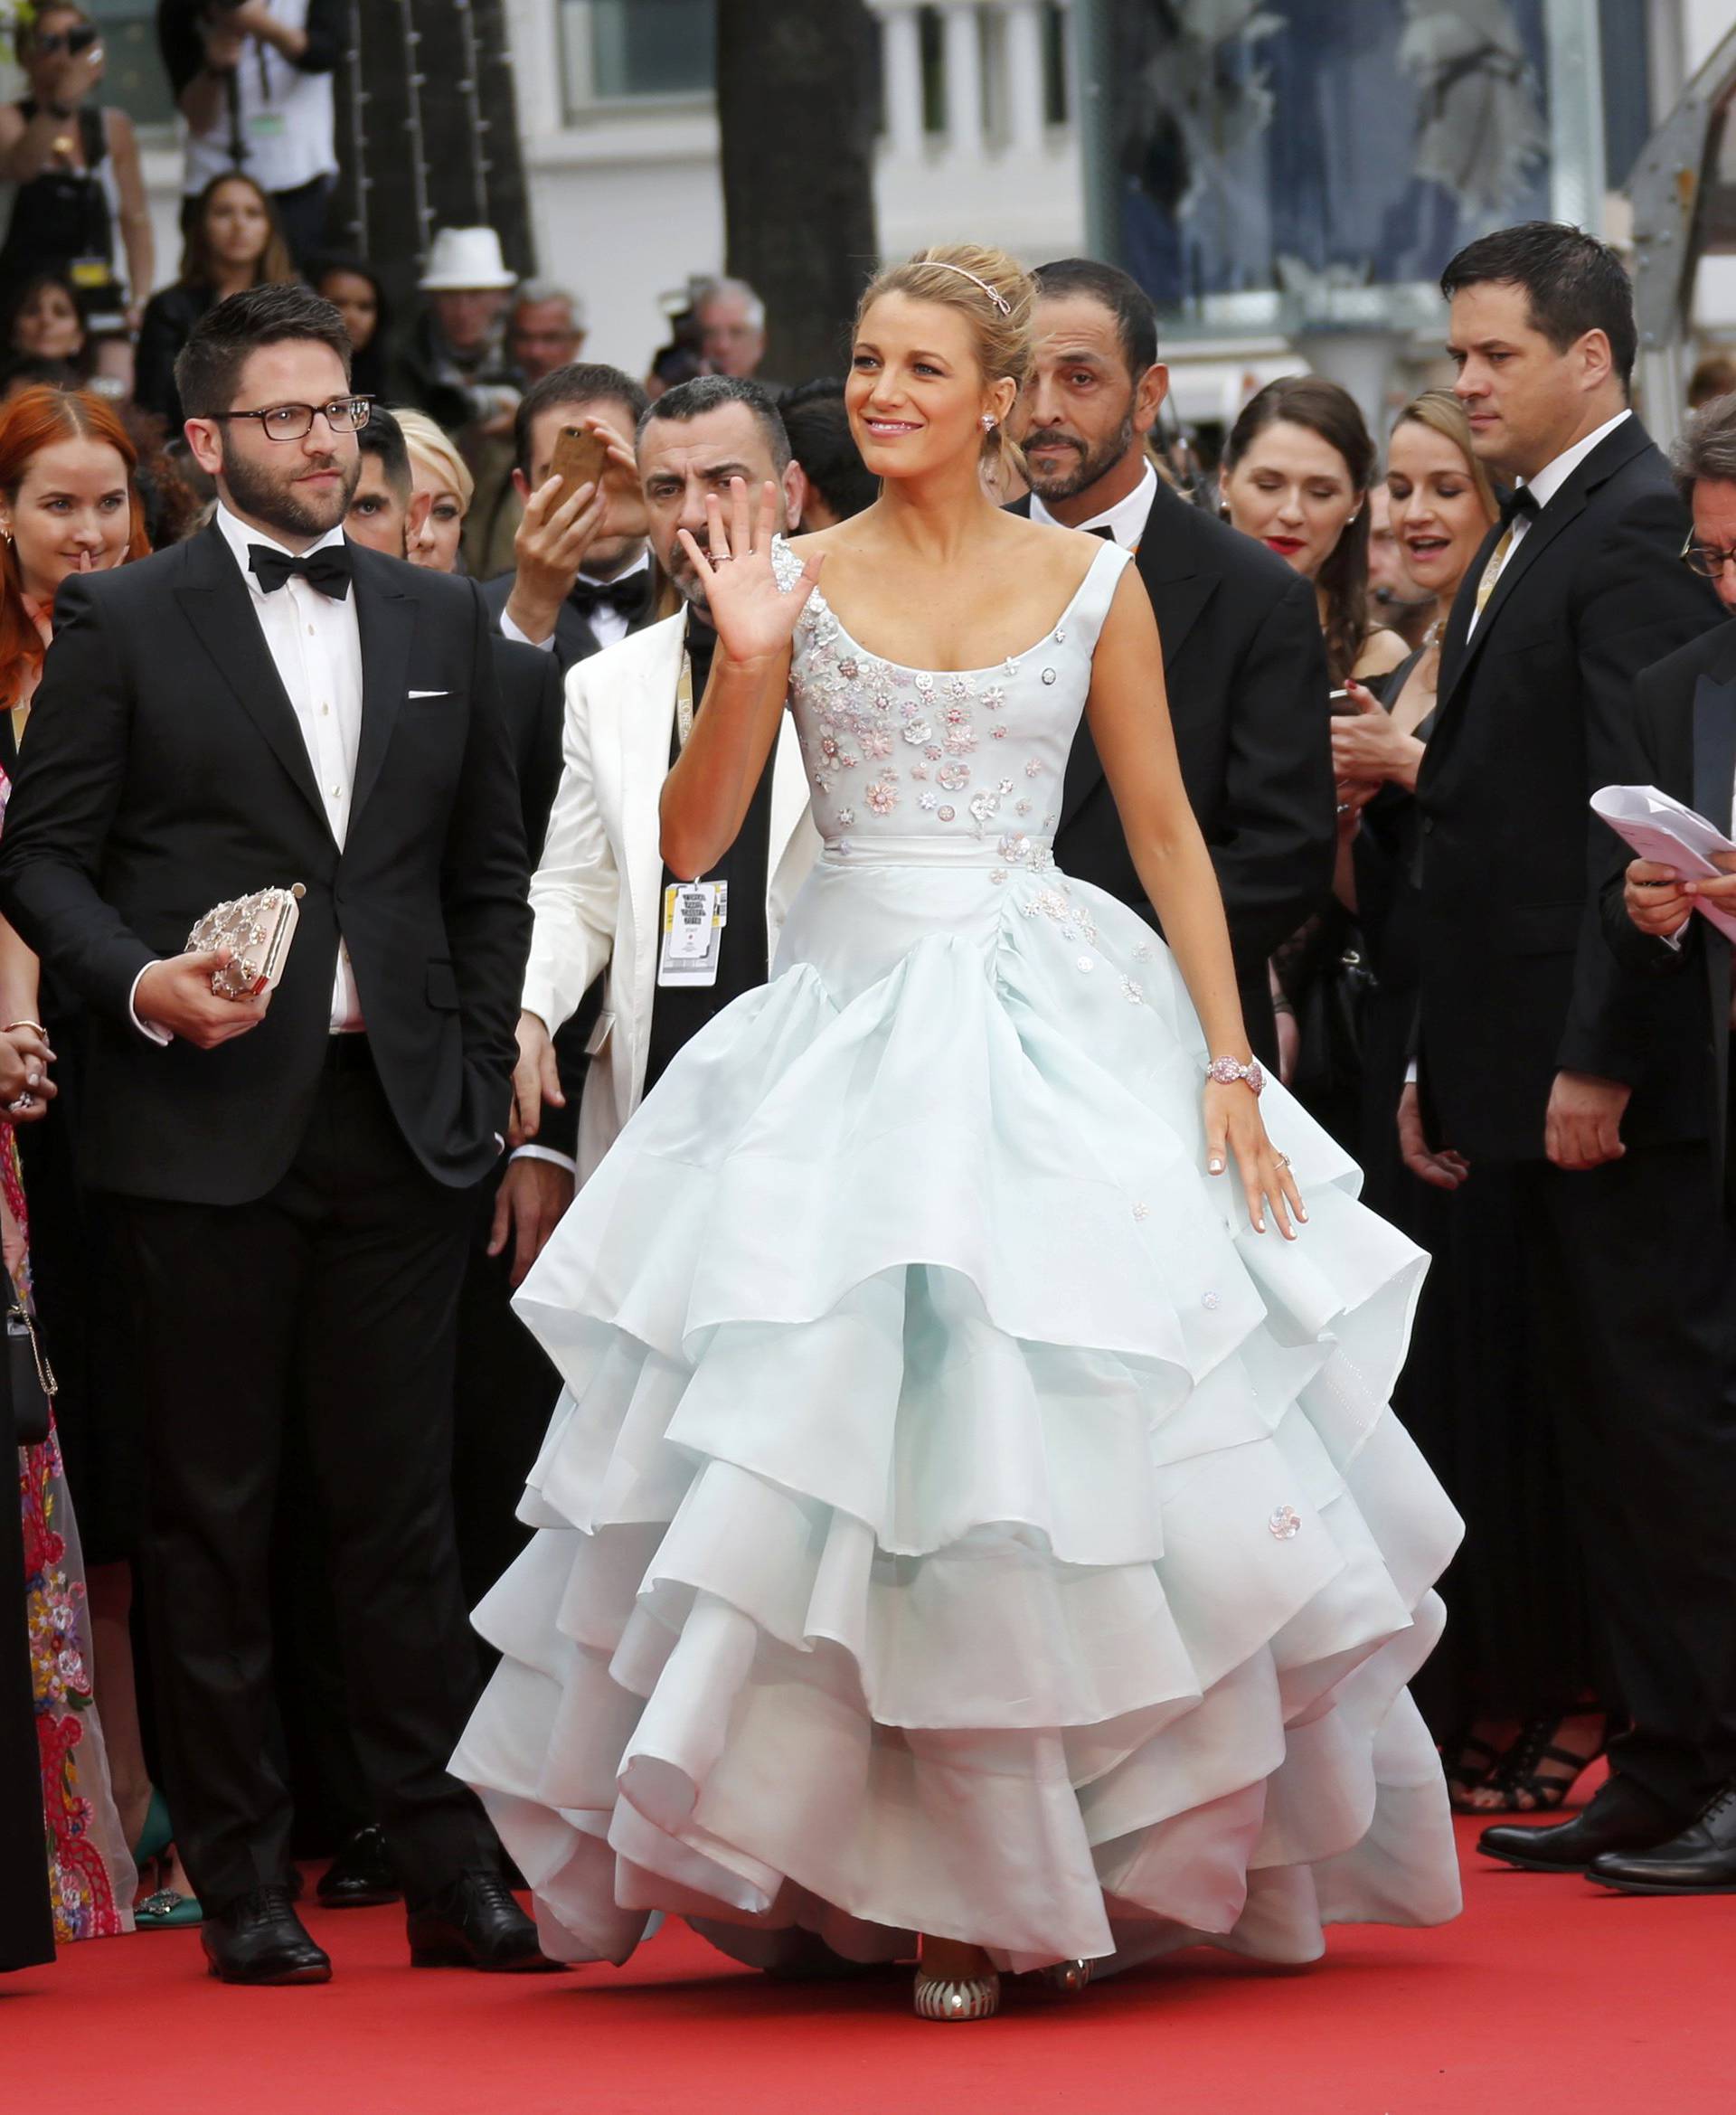 Actress Blake Lively arrives for the screening of the film "Ma loute" in competition at the 69th Cannes Film Festival in Cannes